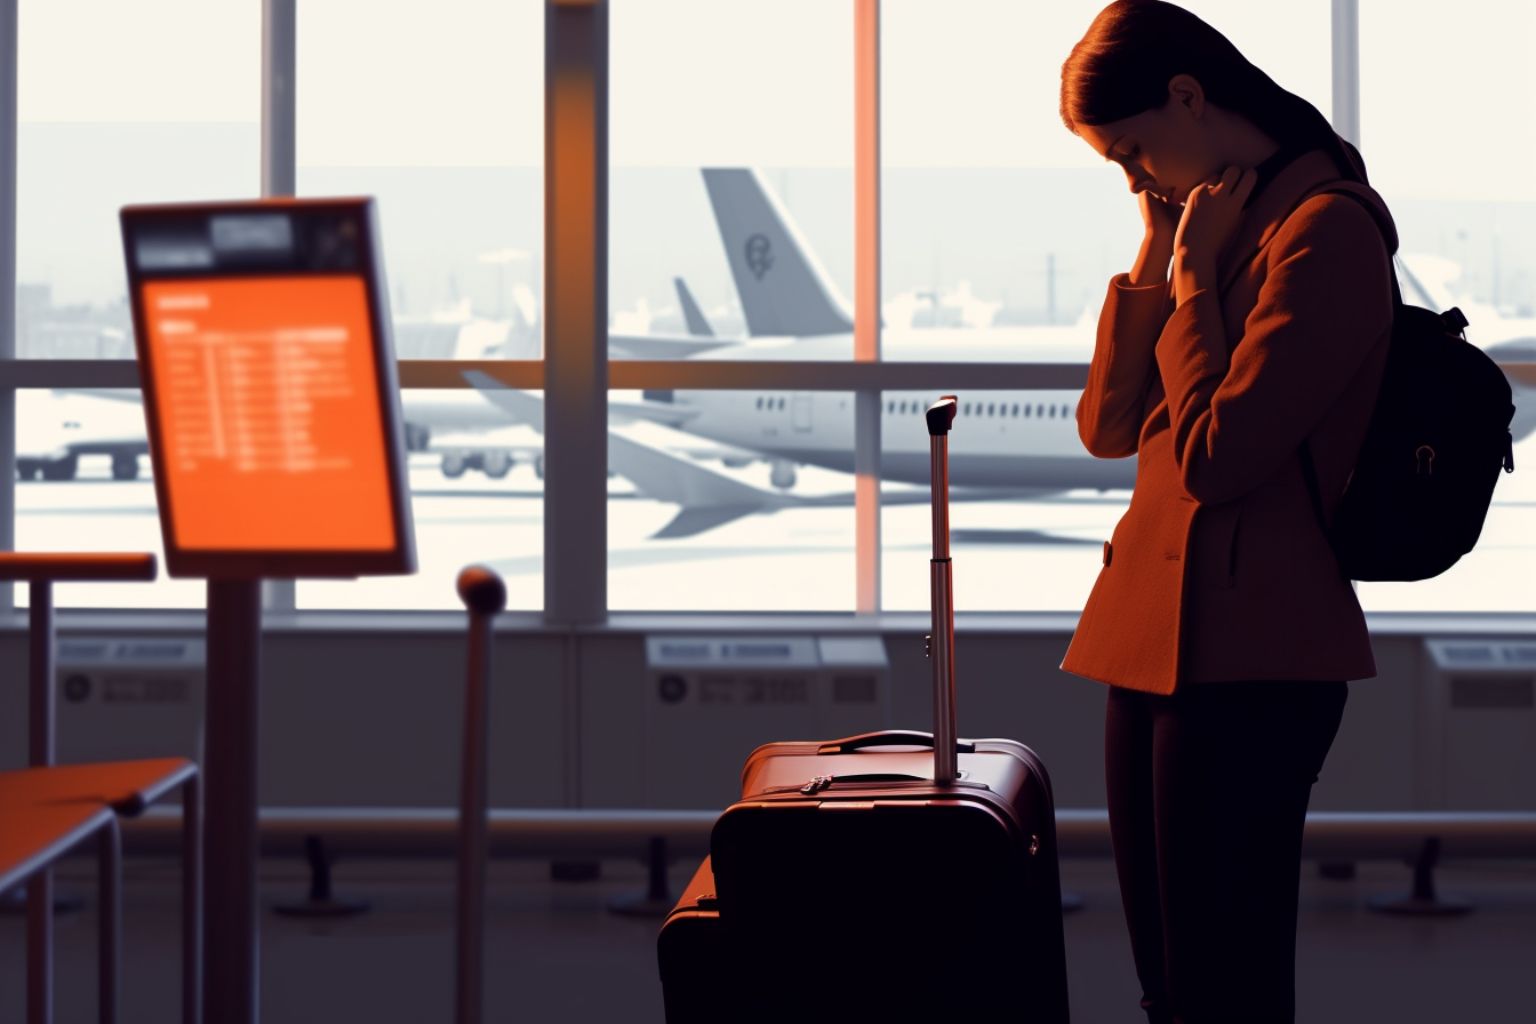 Here's an Expedia refund dilemma: One airline canceled a woman's flight but then gave her a credit she couldn't use. Can our advocates fix this?